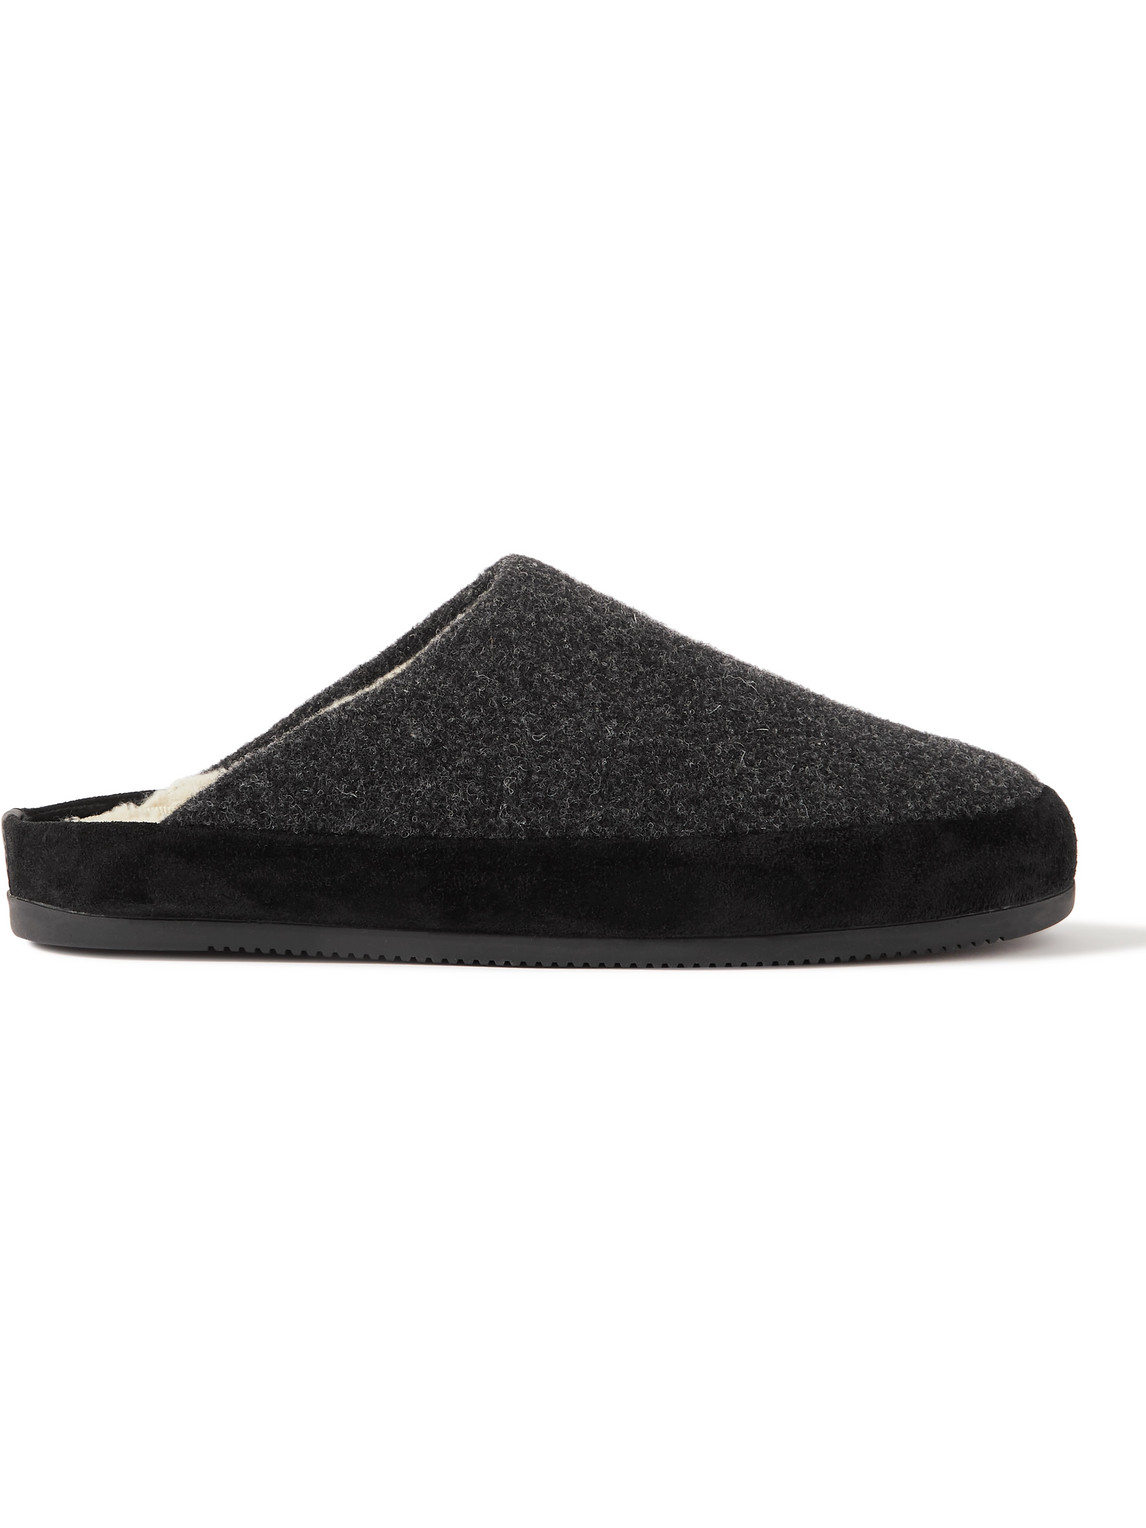 Mulo - Suede-Trimmed Shearling-Lined Recycled-Wool Slippers - Men - Gray - UK 6 von Mulo